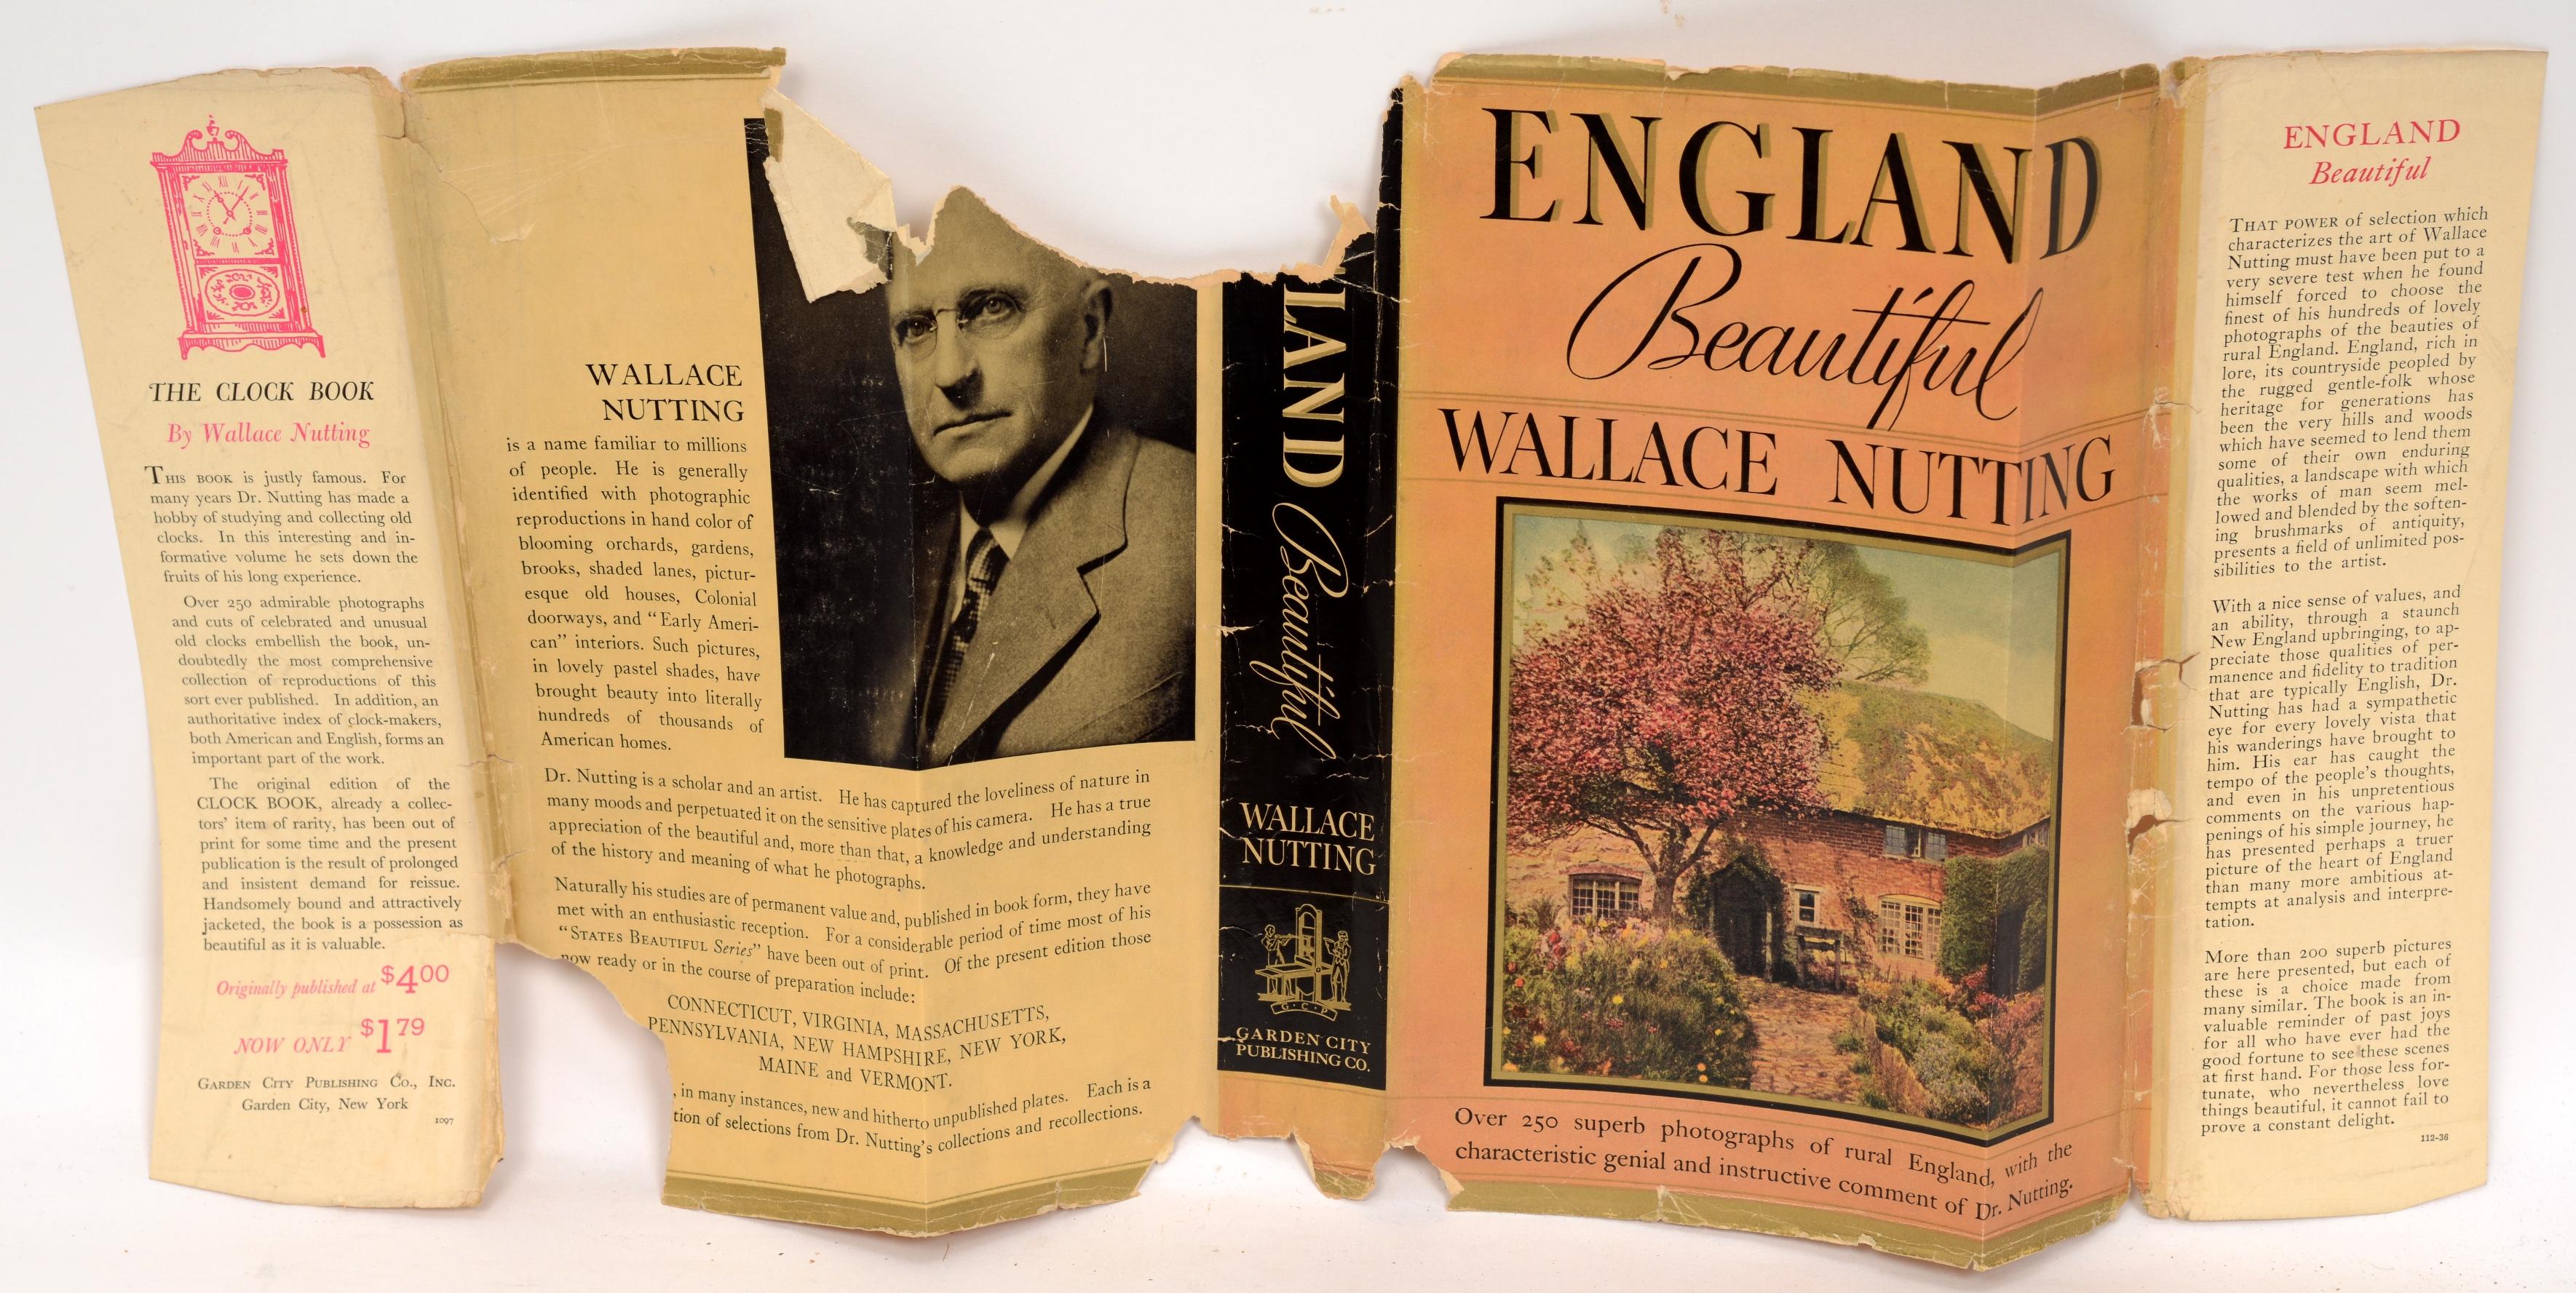 Ireland Beautiful and England Beautiful, a Pair of Books by Wallace Nutting 12